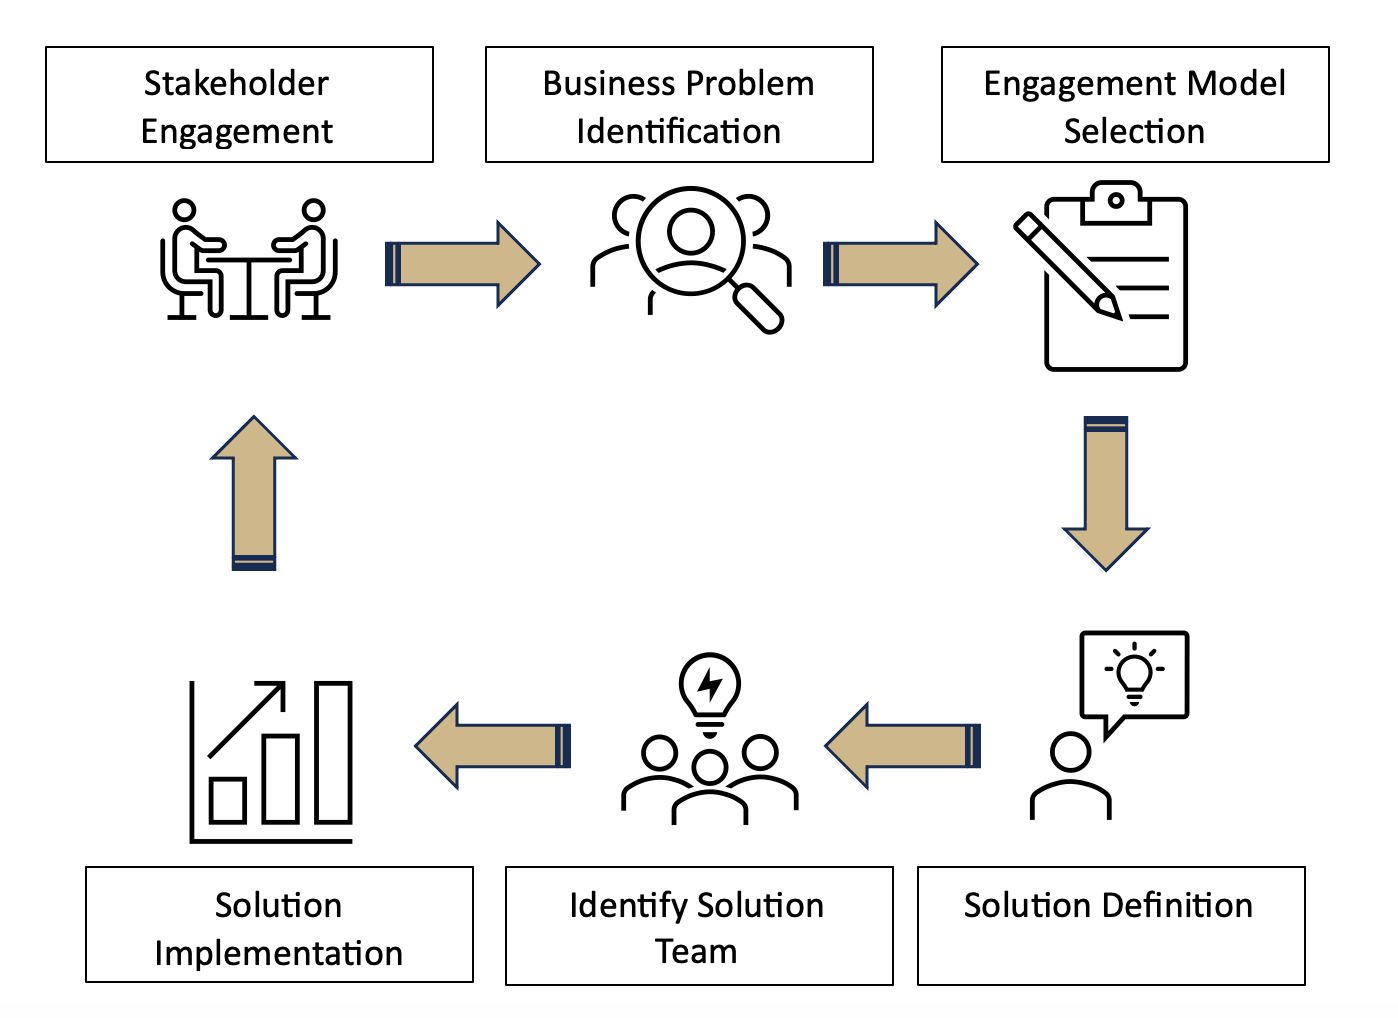 Lifecycle engagement with Krenicki Center: 1. Stakeholder Engagement, 2. Business Problem Identification, 3. Engagement Model Selection, 4. Solution Definition, 5. Identify Solution Team, 6. Solution Implementation